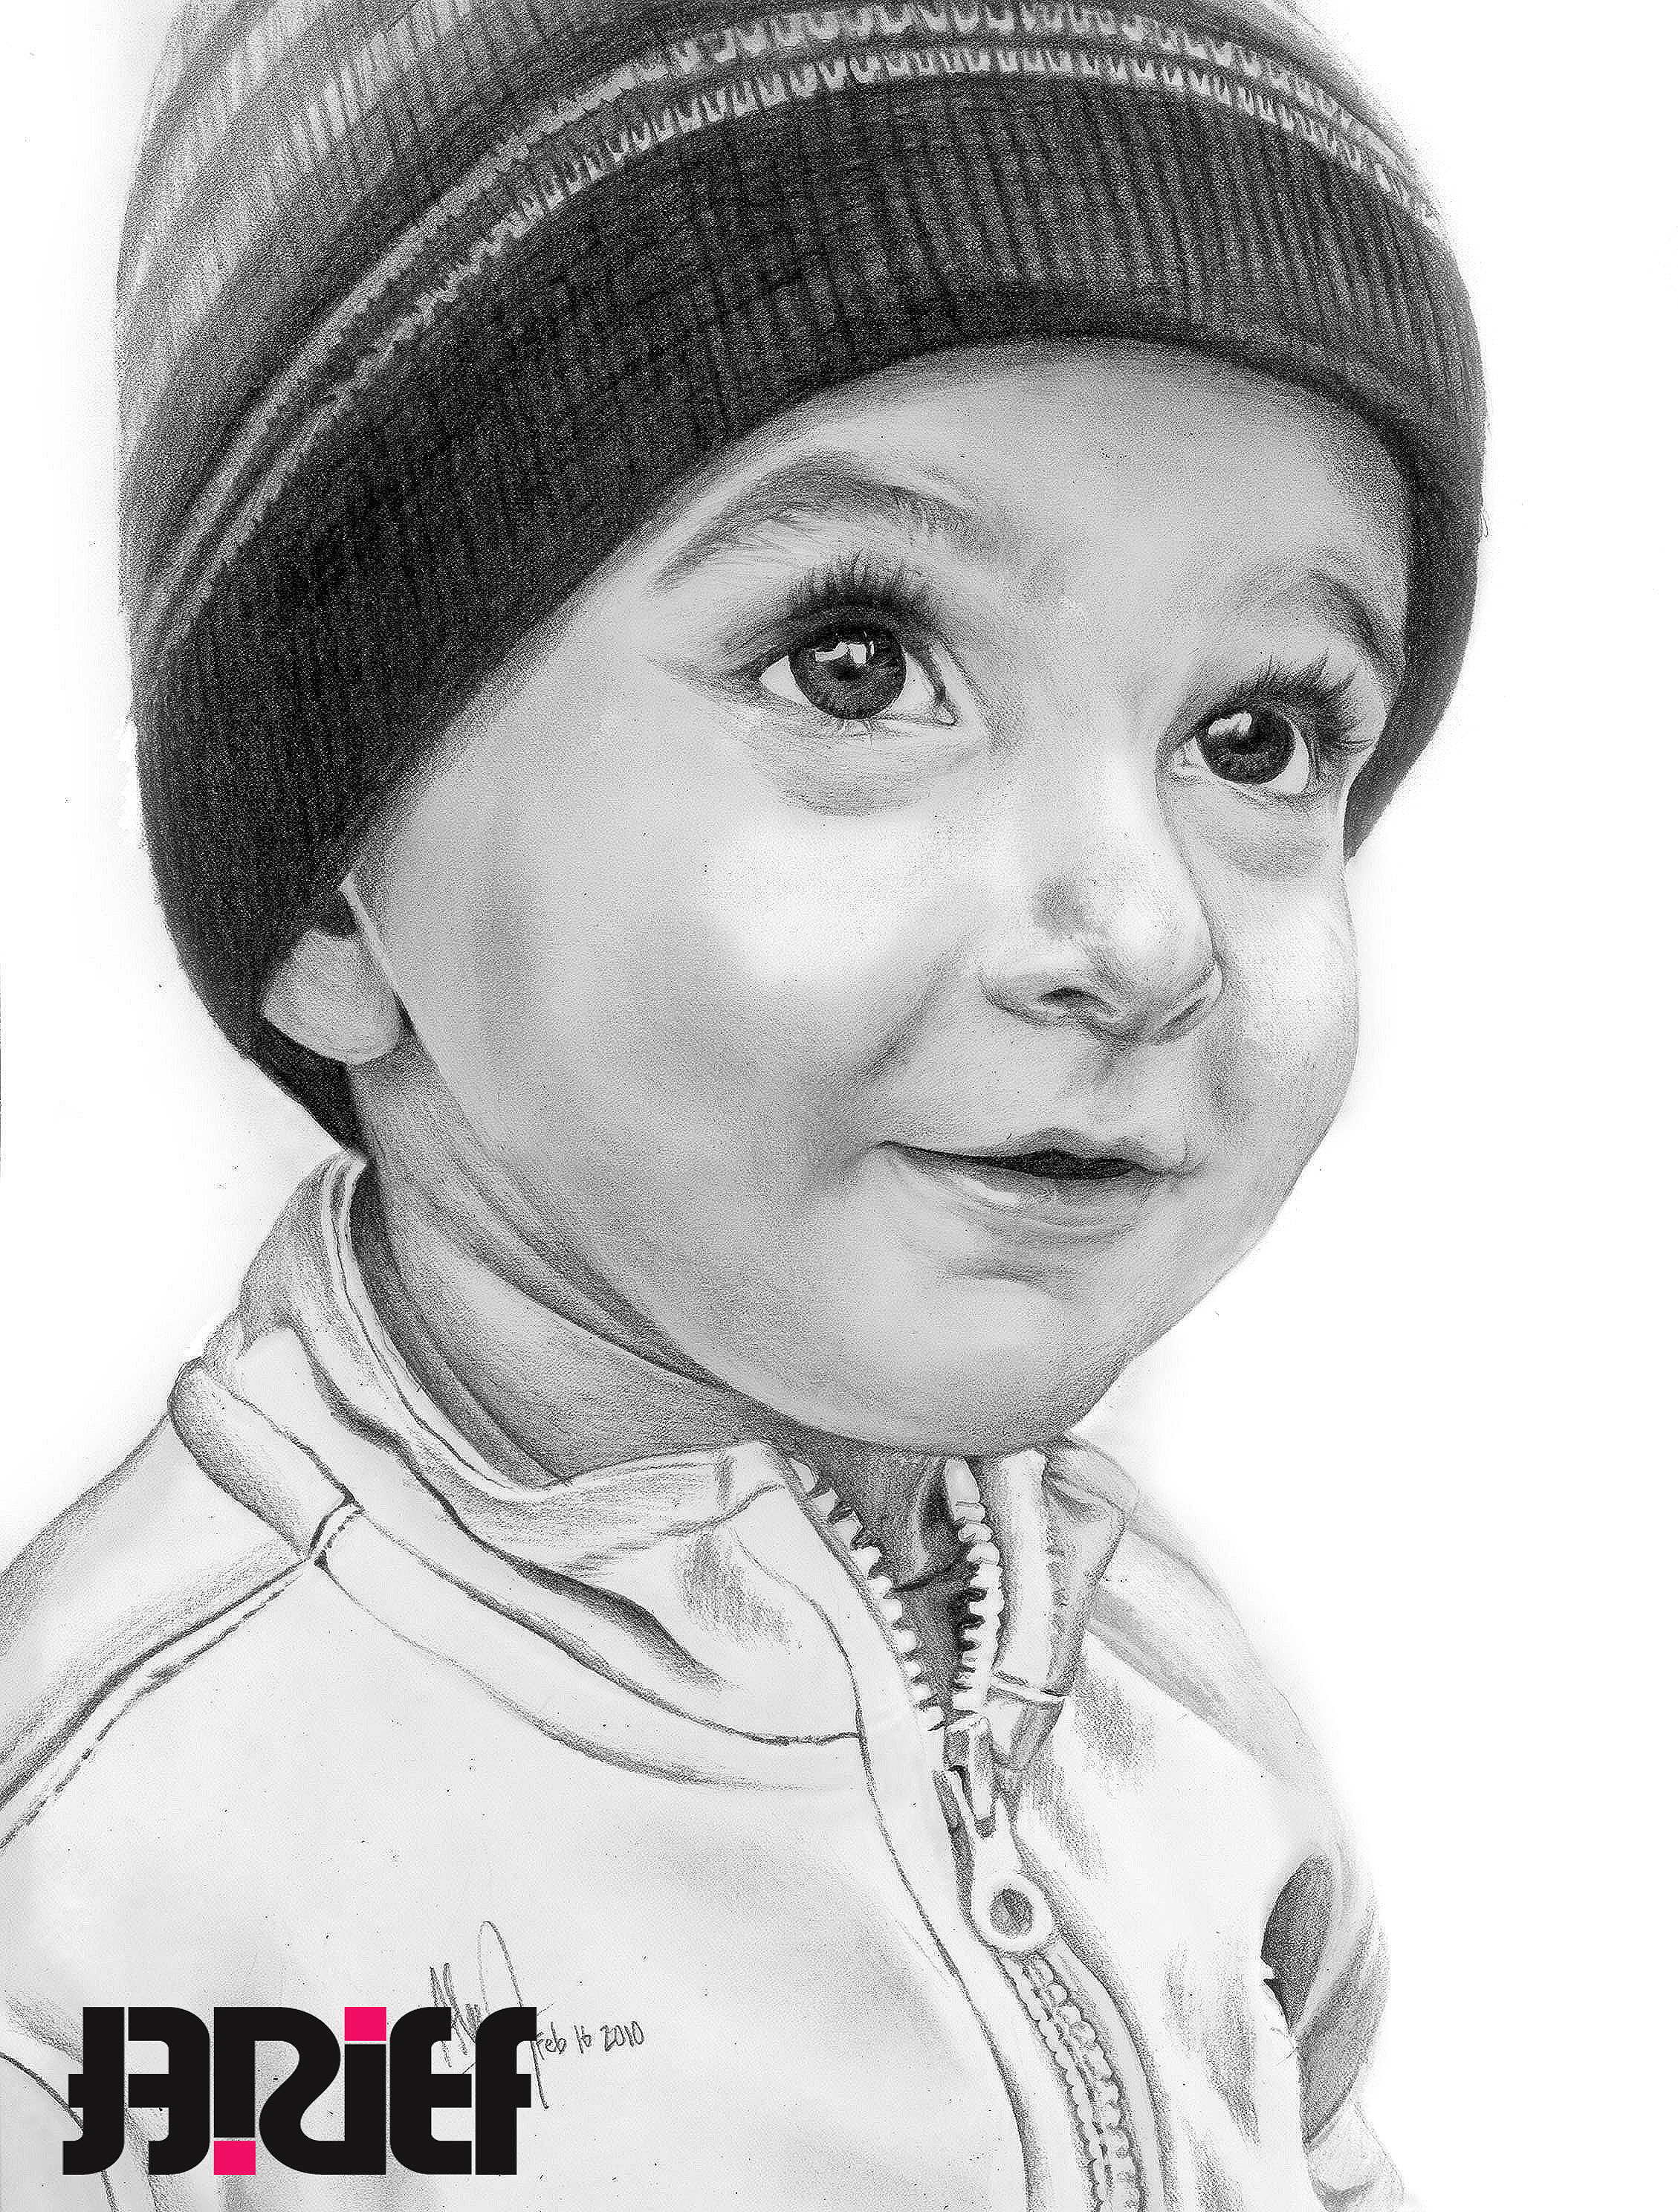 Free Baby Drawings, Download Free Baby Drawings png images, Free